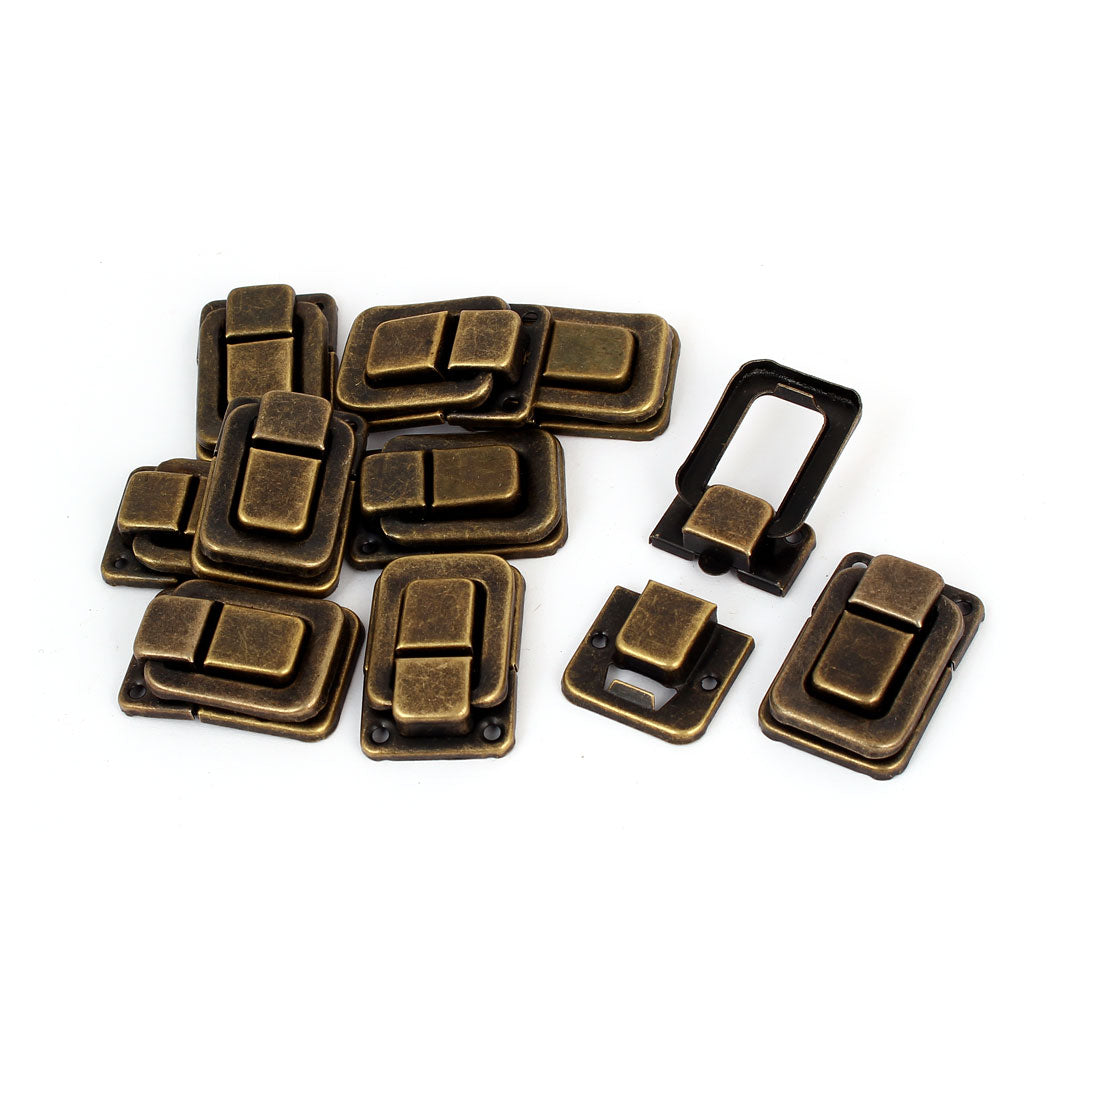 uxcell Uxcell Bags Wooden Case Iron Box Toggle Latch Hasp Lock Bronze Tone 38mm Length 10pcs